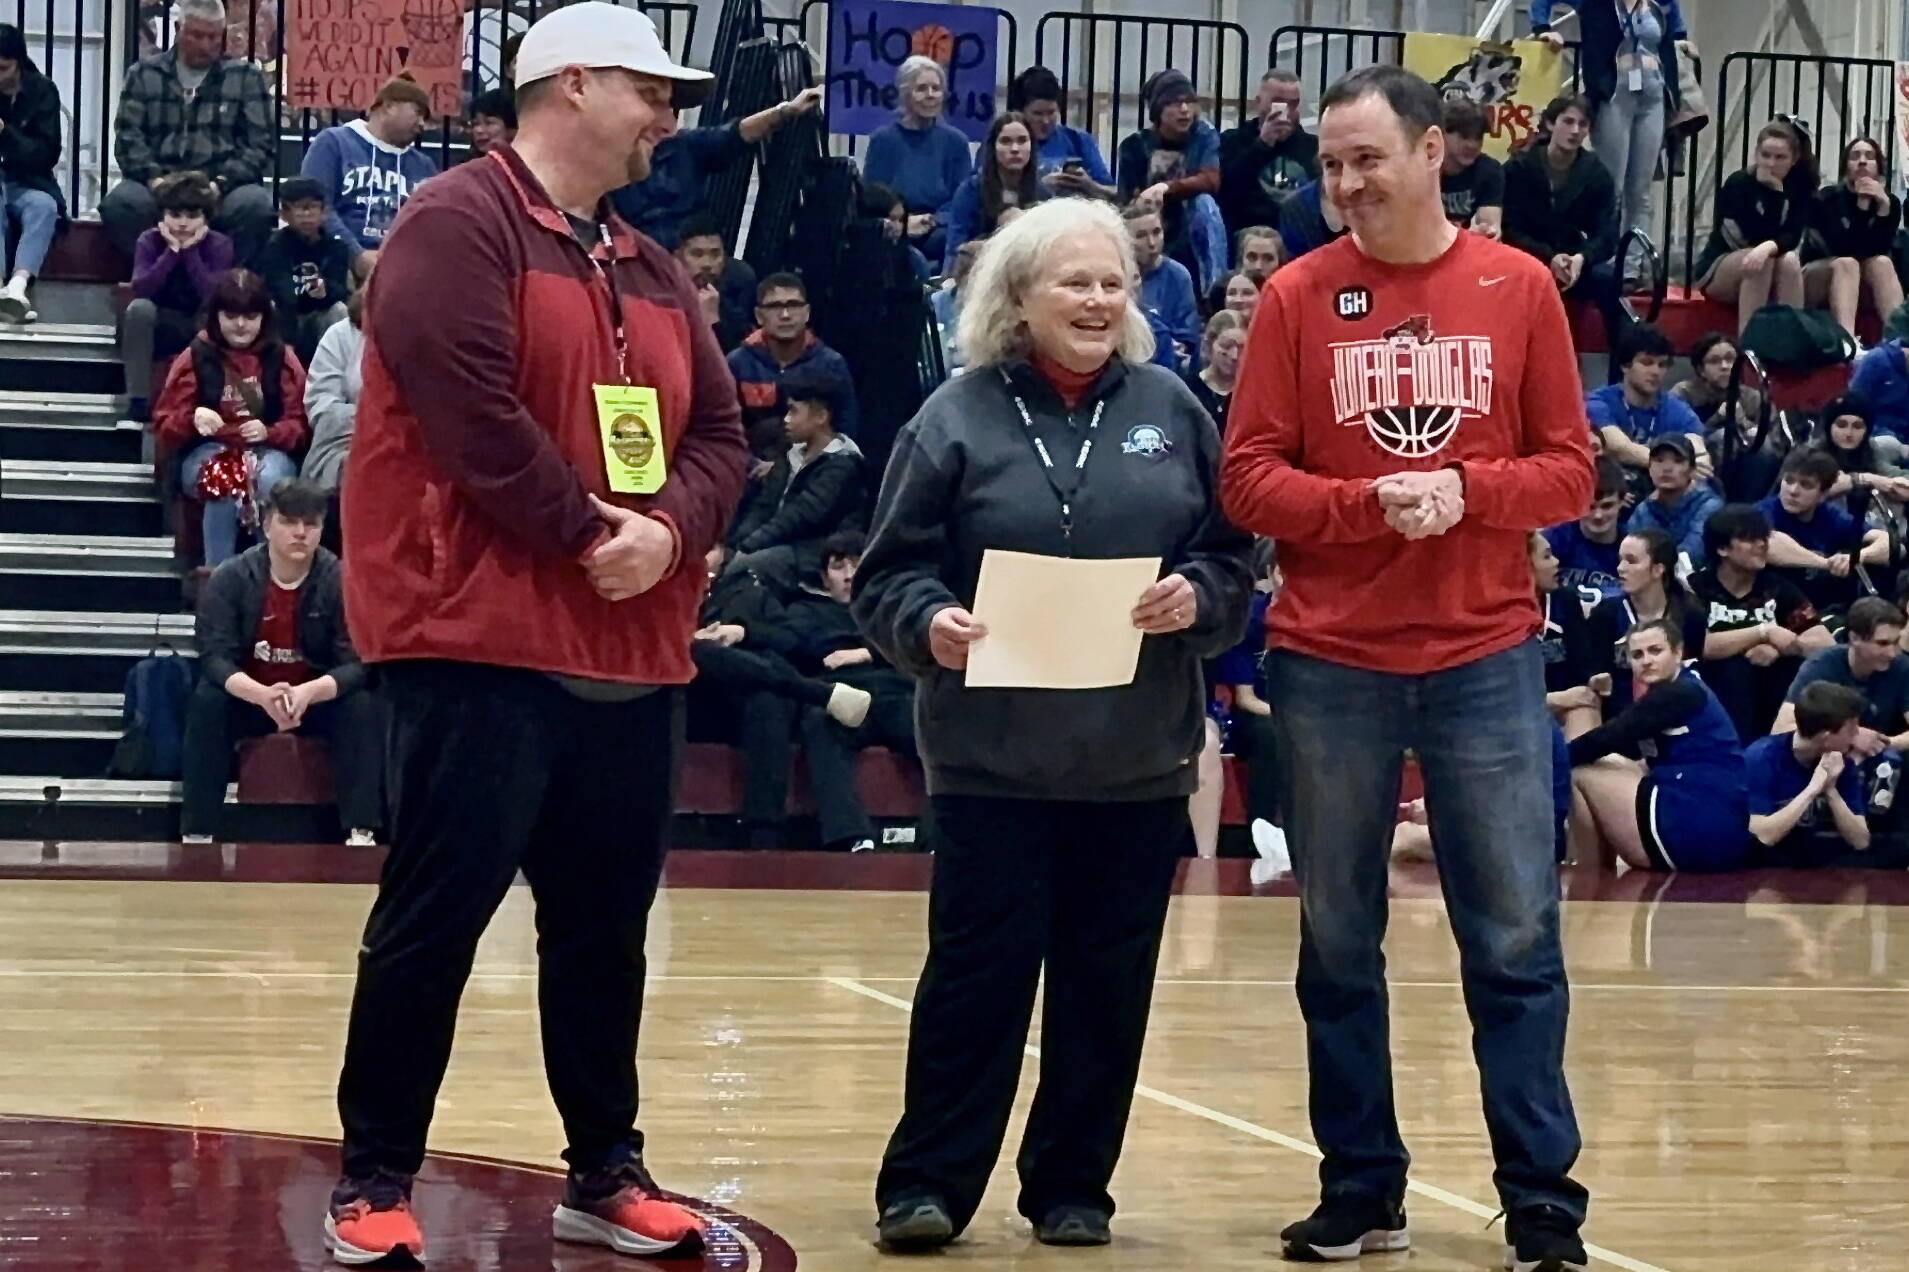 Sandi Wagner, the Alaska School Activities Association associate director, was honored with the first annual Coach George Houston Service Award on Wednesday during the Alaska Airlines Region V 4A Basketball Tournament at Mt. Edgecumbe High School’s B.J. McGillis Gymnasium in Sitka. Wagner is shown with Juneau-Douglas High School: Yadaa.at Kalé Activities Director Chad Benz and JDHS boys basketball coach Robert Casperson. (Photo courtesy Andrew Friske / MEHS)